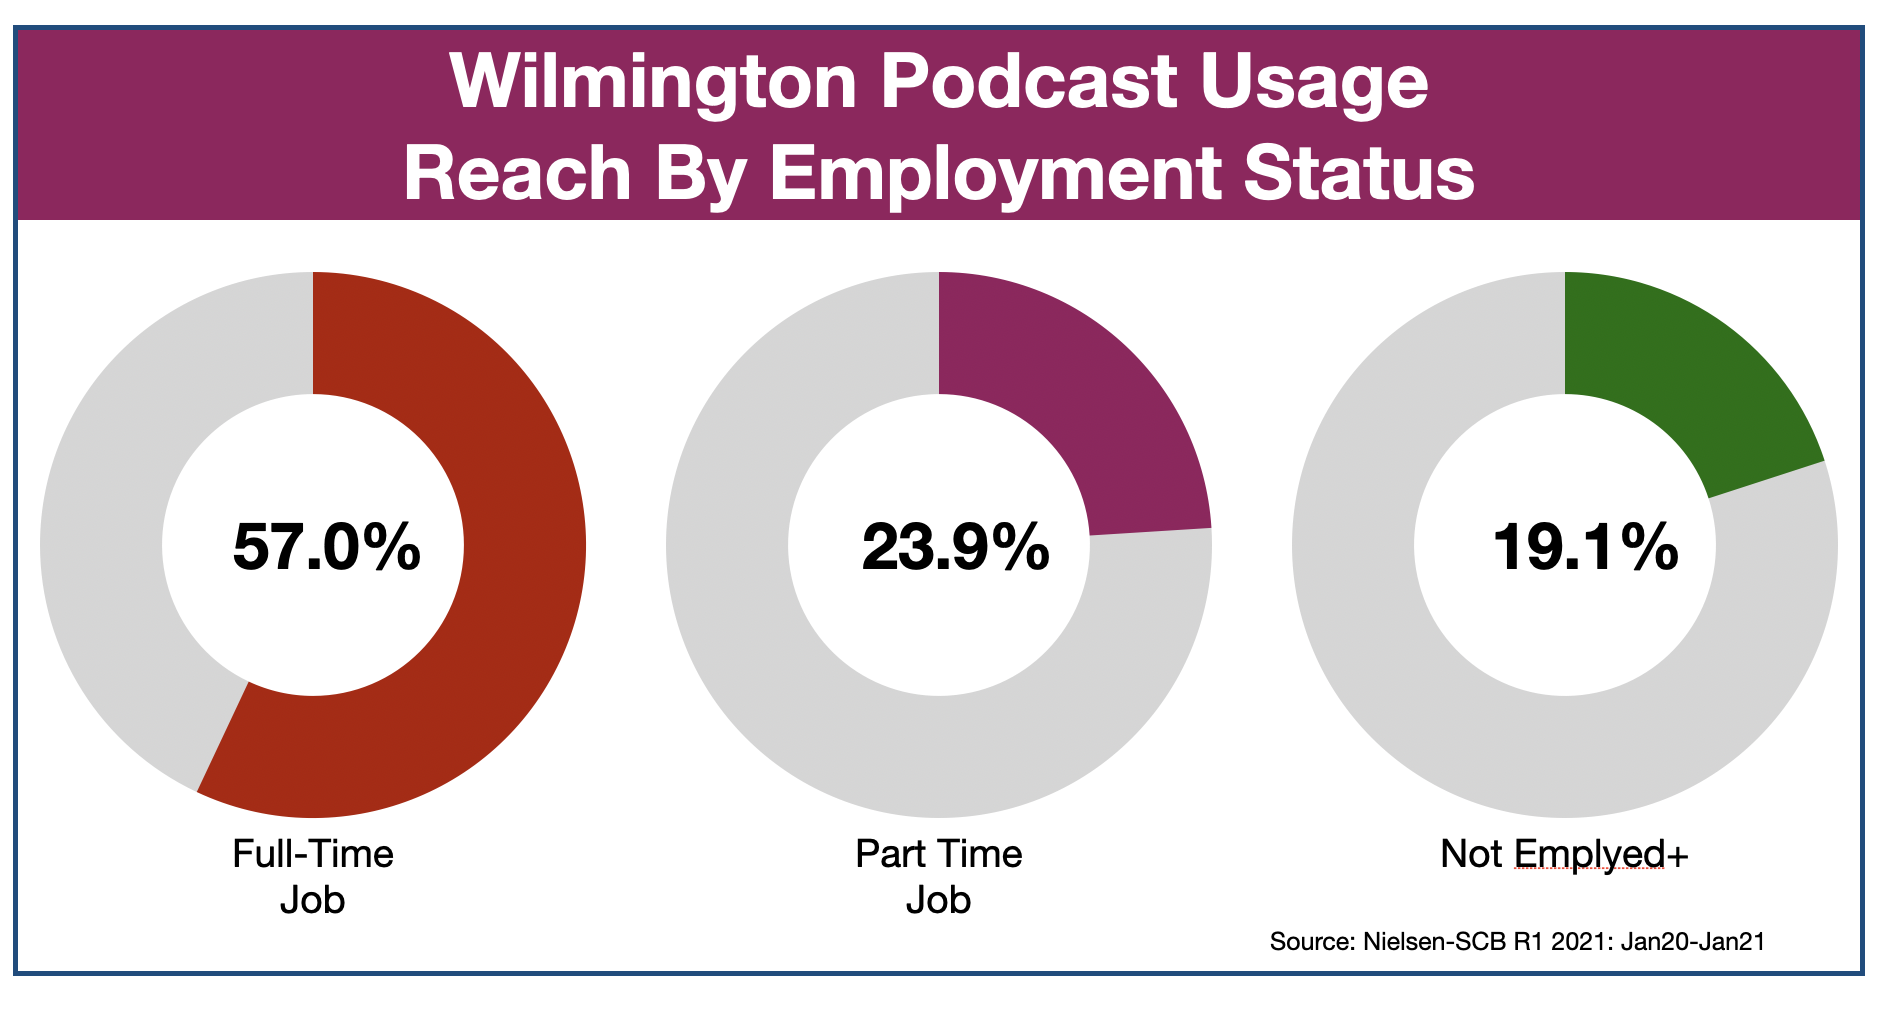 Podcast Advertising In Wilmington Employment